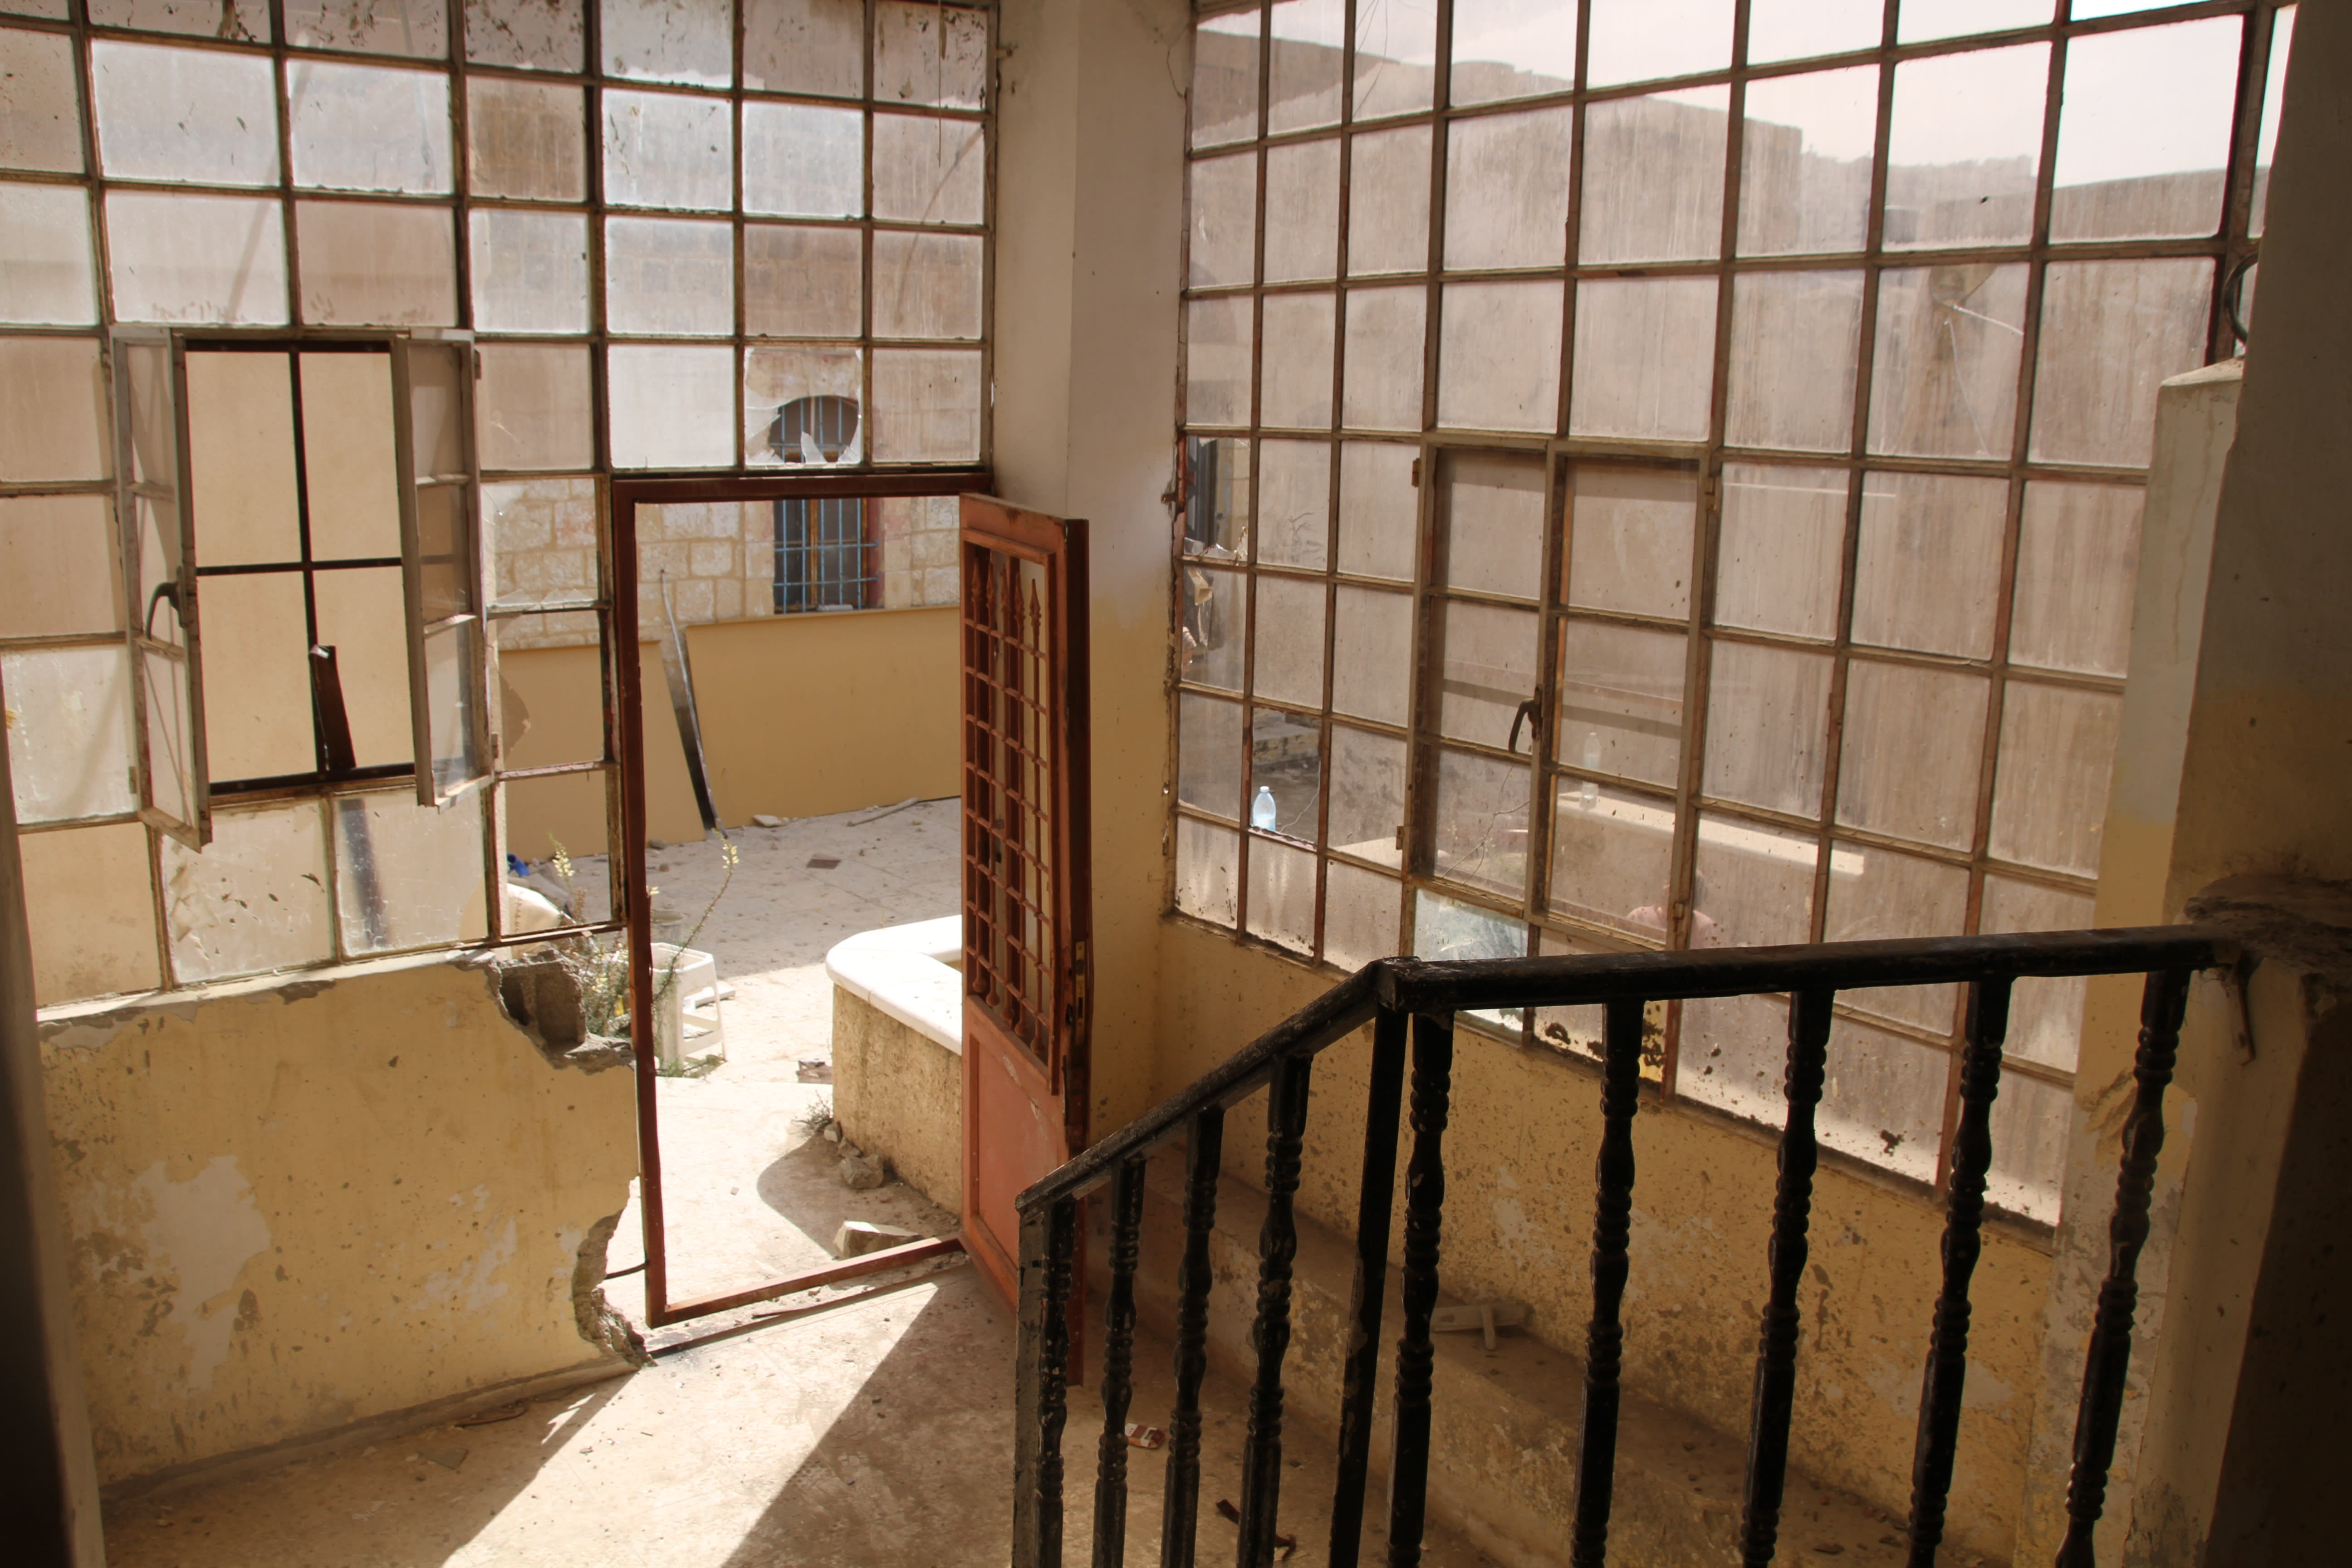 Inside view of one of the two Hebron homes, Beit Rachel and Beit Leah (Tovah Lazaroff)